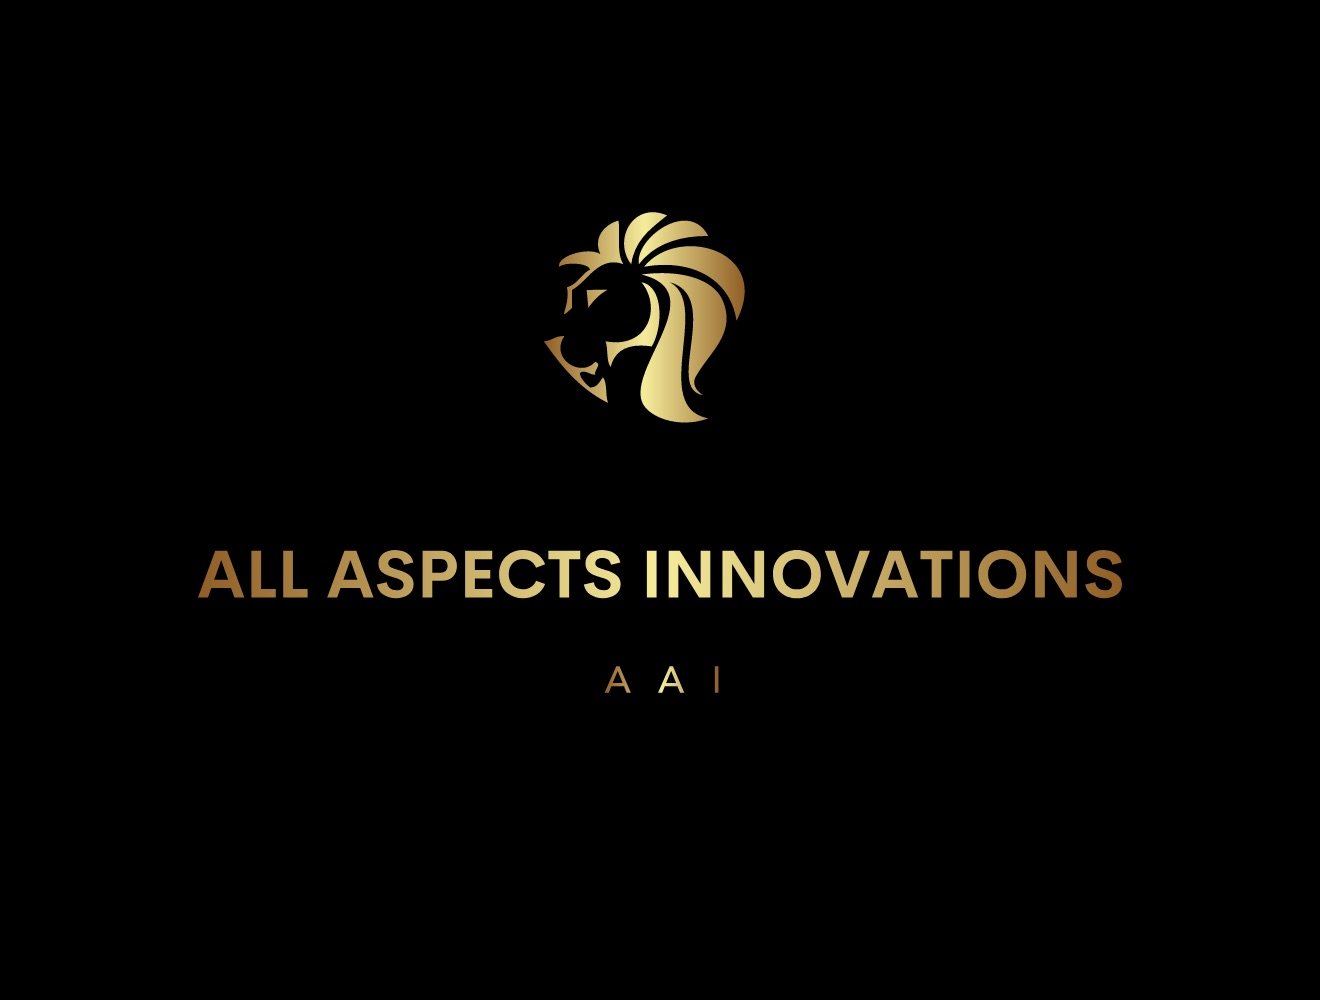 All Aspects Innovations